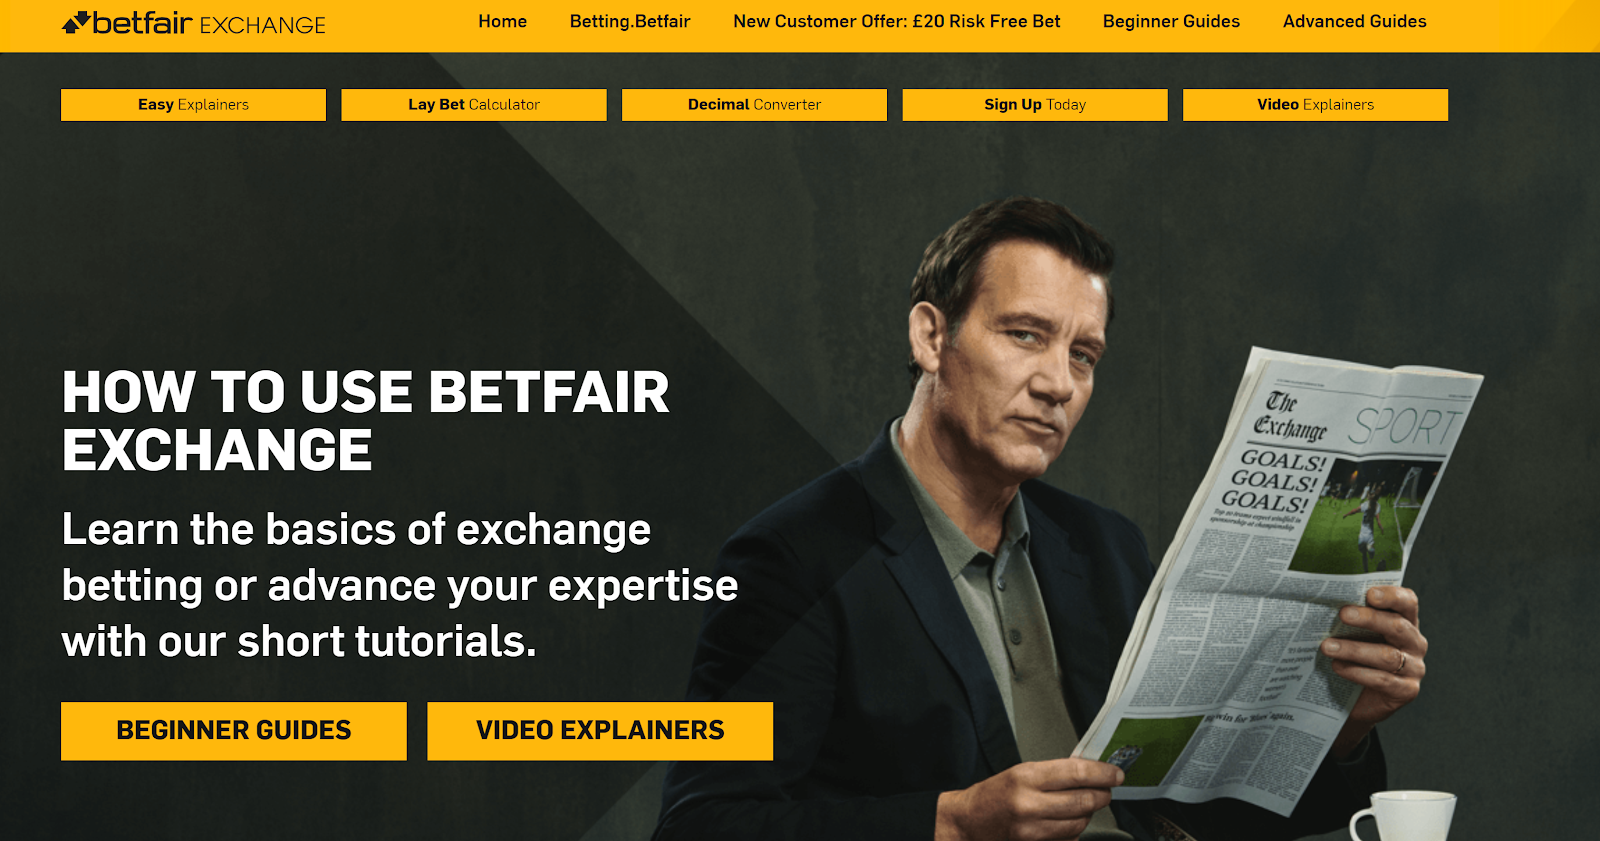 Betfair has one of the best betting apps